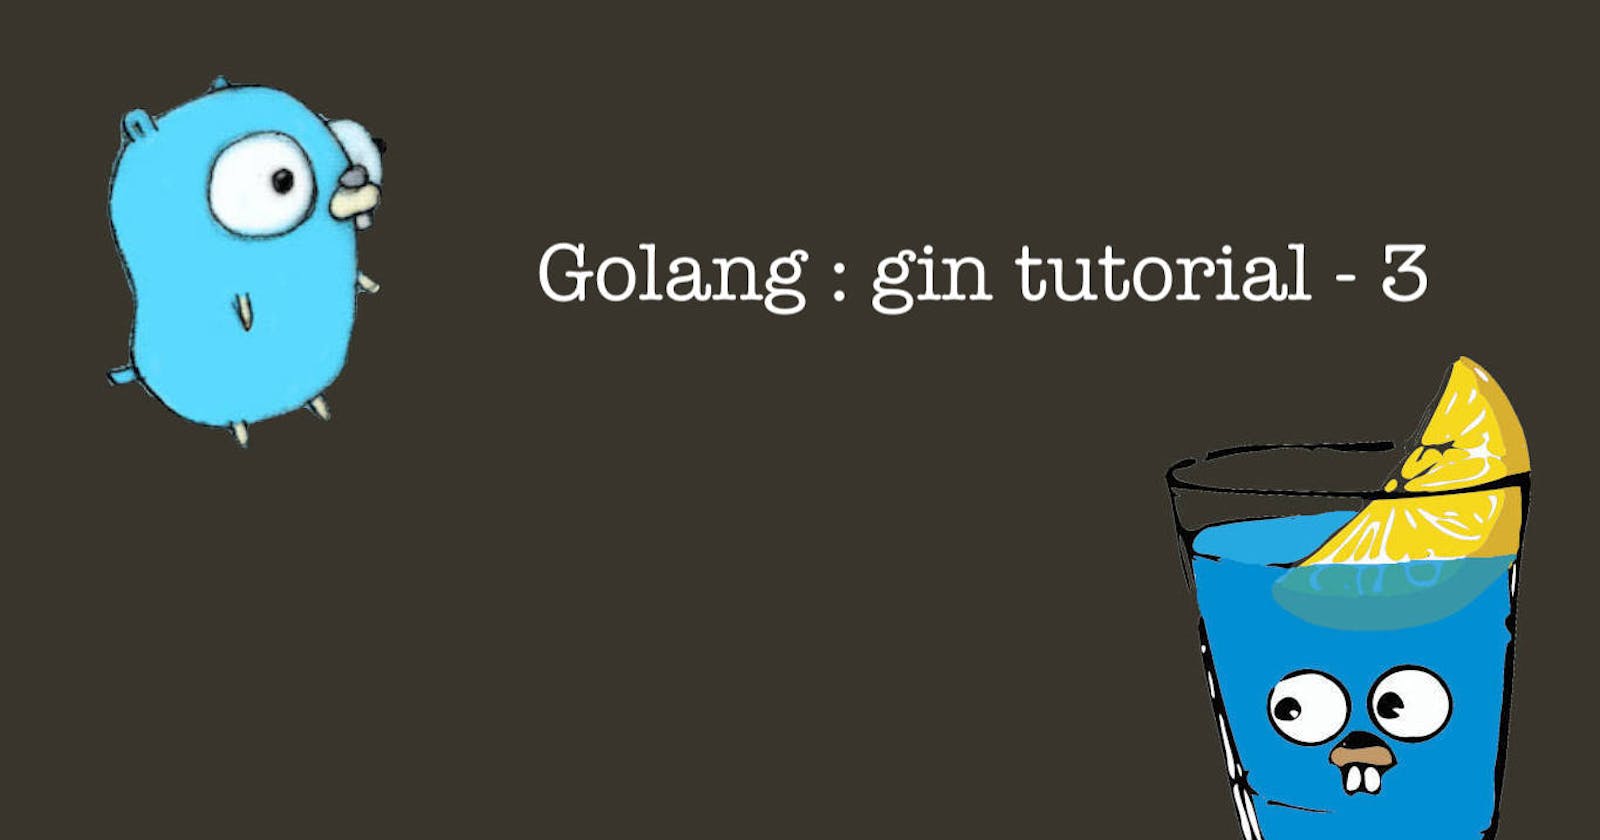 Golang : gin tutorial - 3 (Create a POST request)